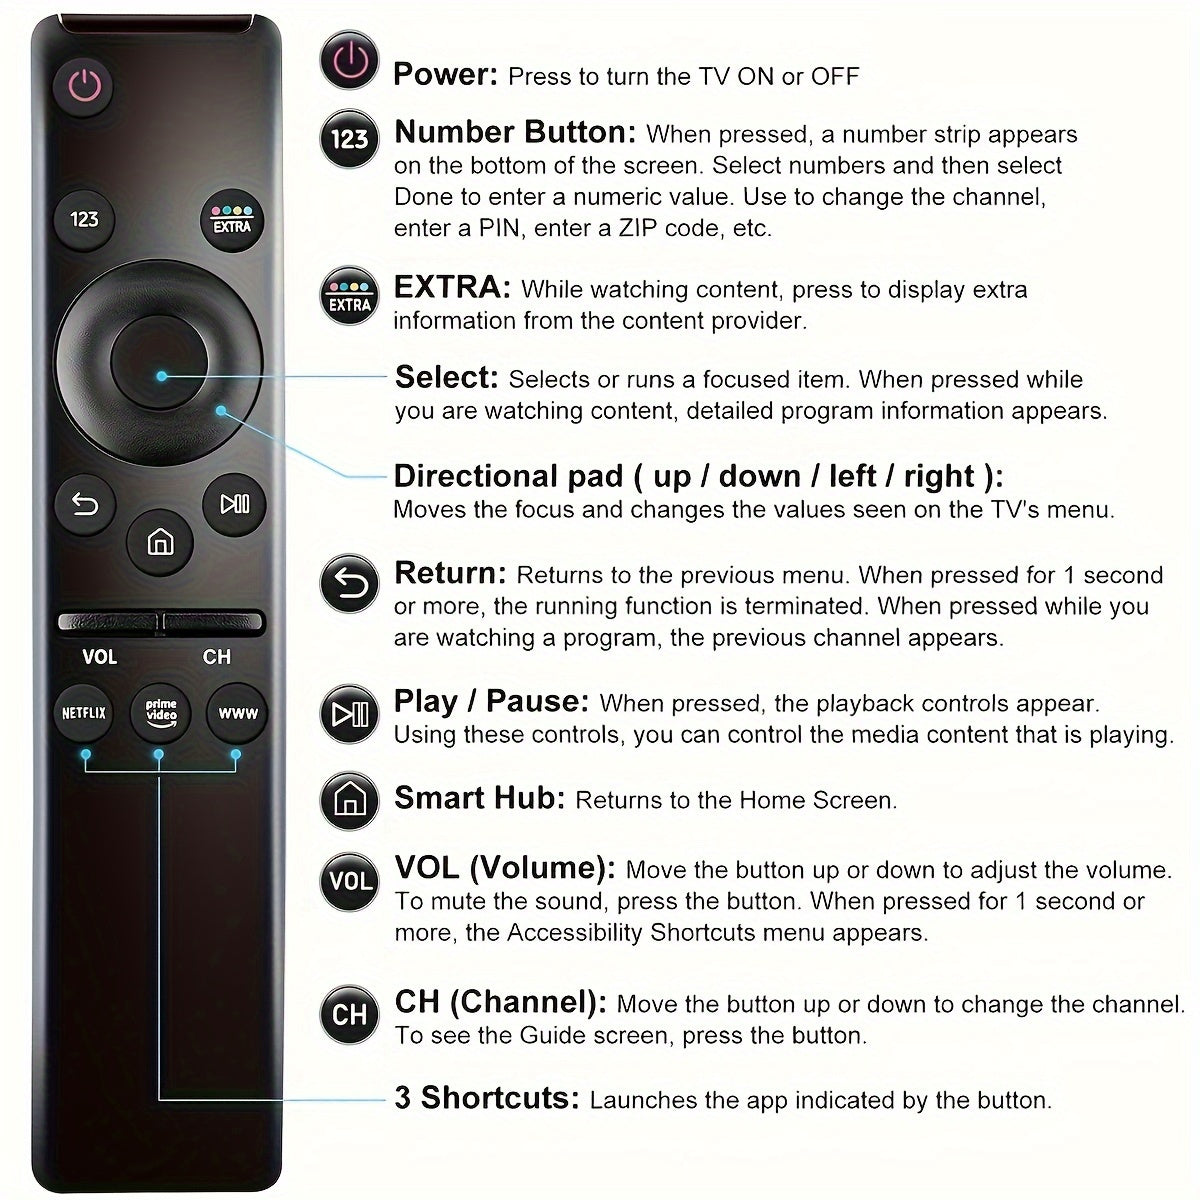 Portable Model Universal Universal Remote Control - Compatible With All Samsung TVs,Including 4K, 8K, 3D, Smart TVs - With Buttons For Netflix, Prime Video,WWW  Just Install The Battery And It's Ready To Use